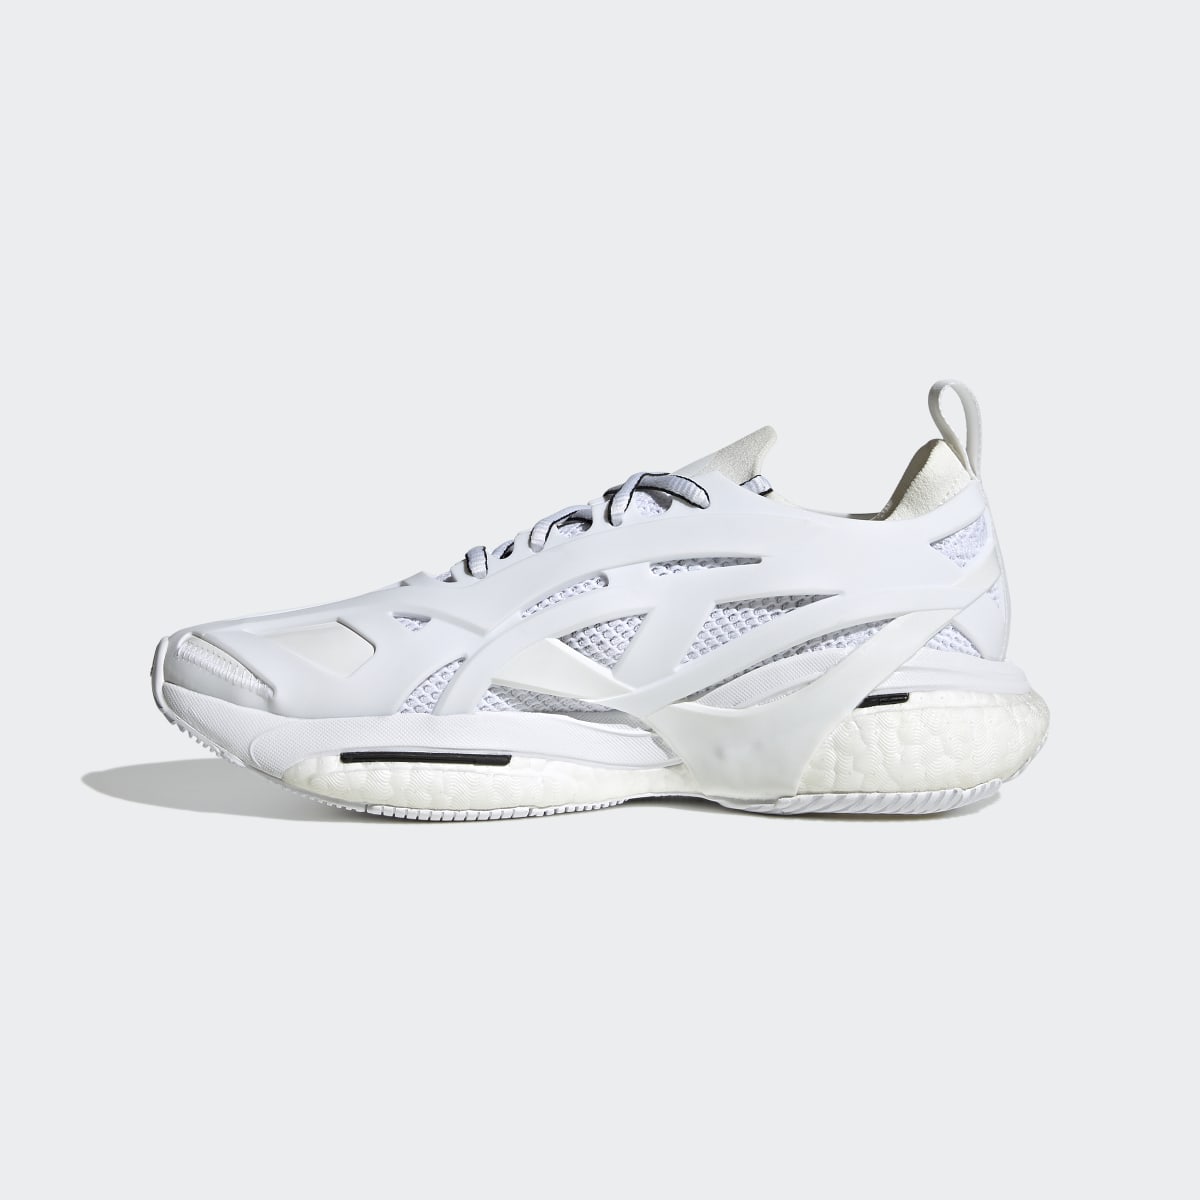 Adidas by Stella McCartney Solarglide Shoes. 7